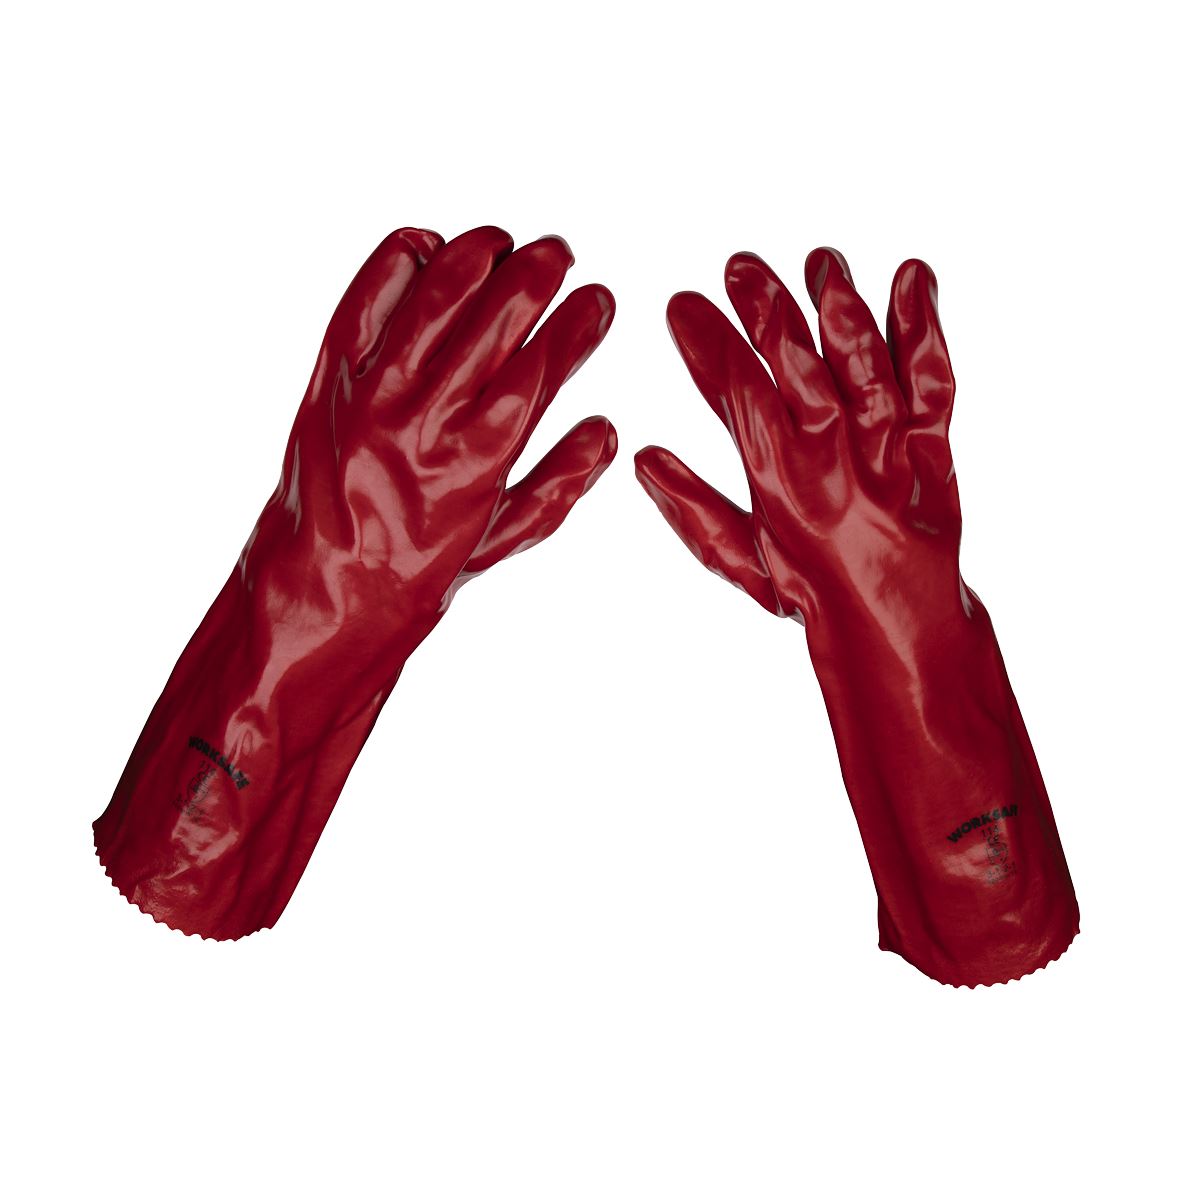 Worksafe by Sealey Red PVC Gauntlets 450mm - Pair